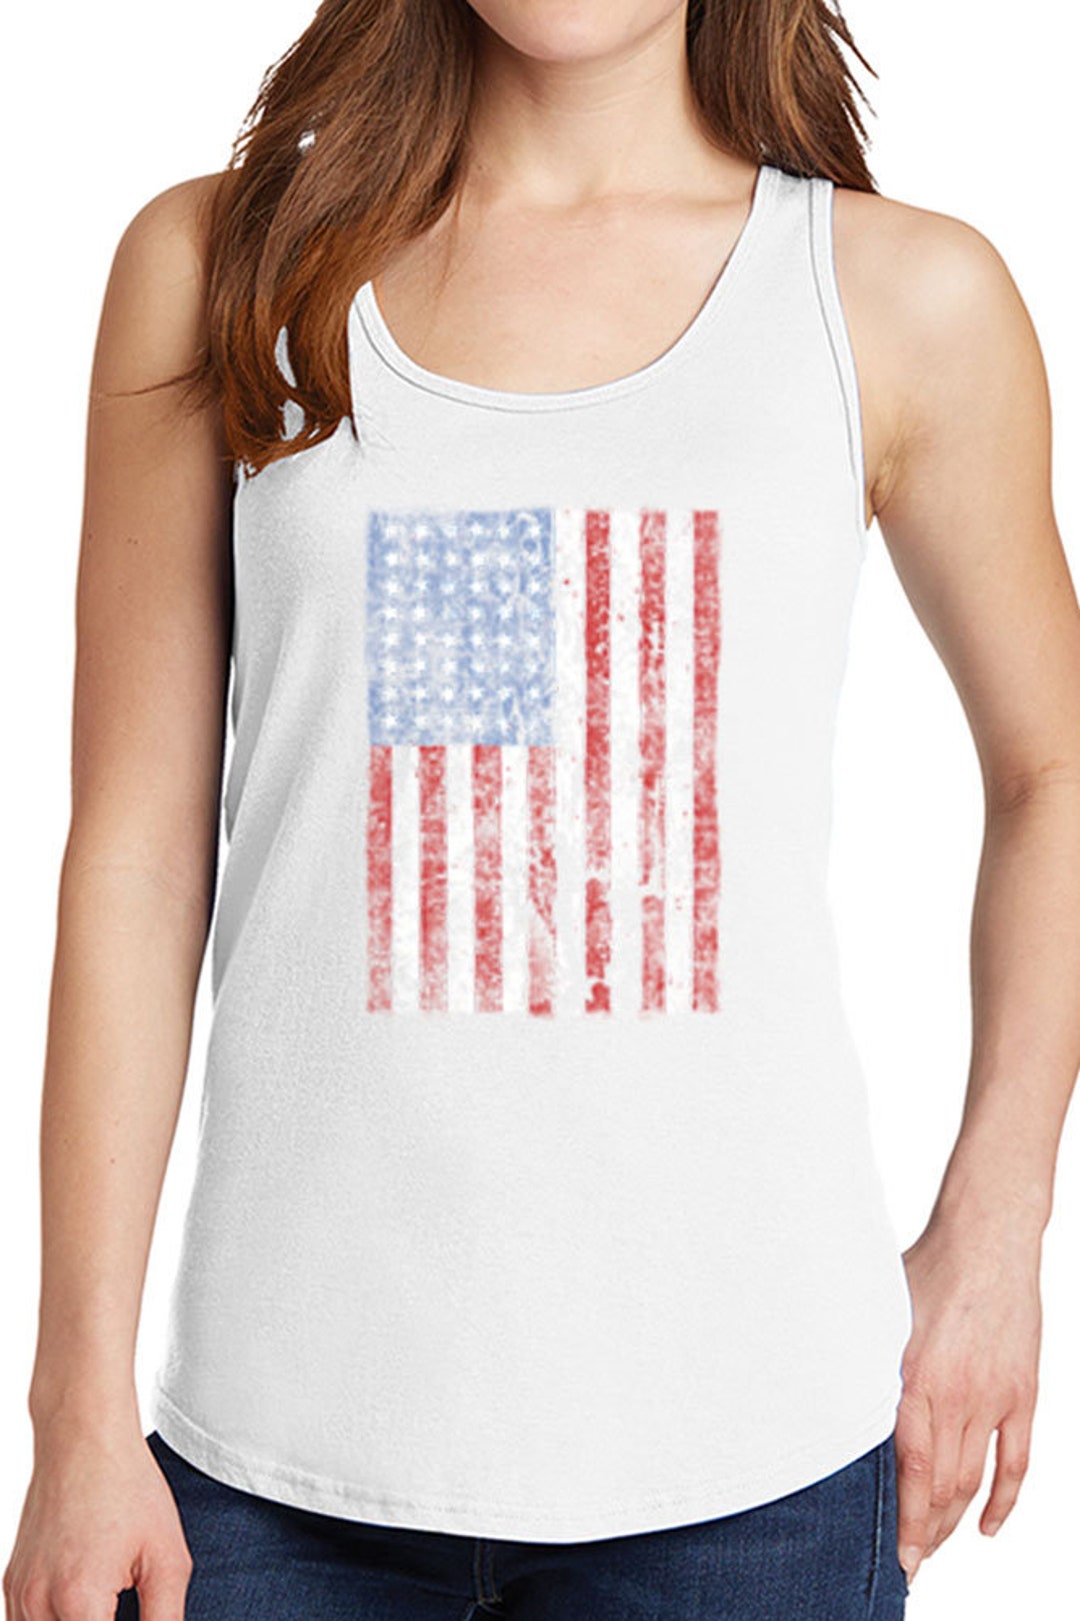 Women's Distressed American Flag Core Cotton Tank Tops - Etsy